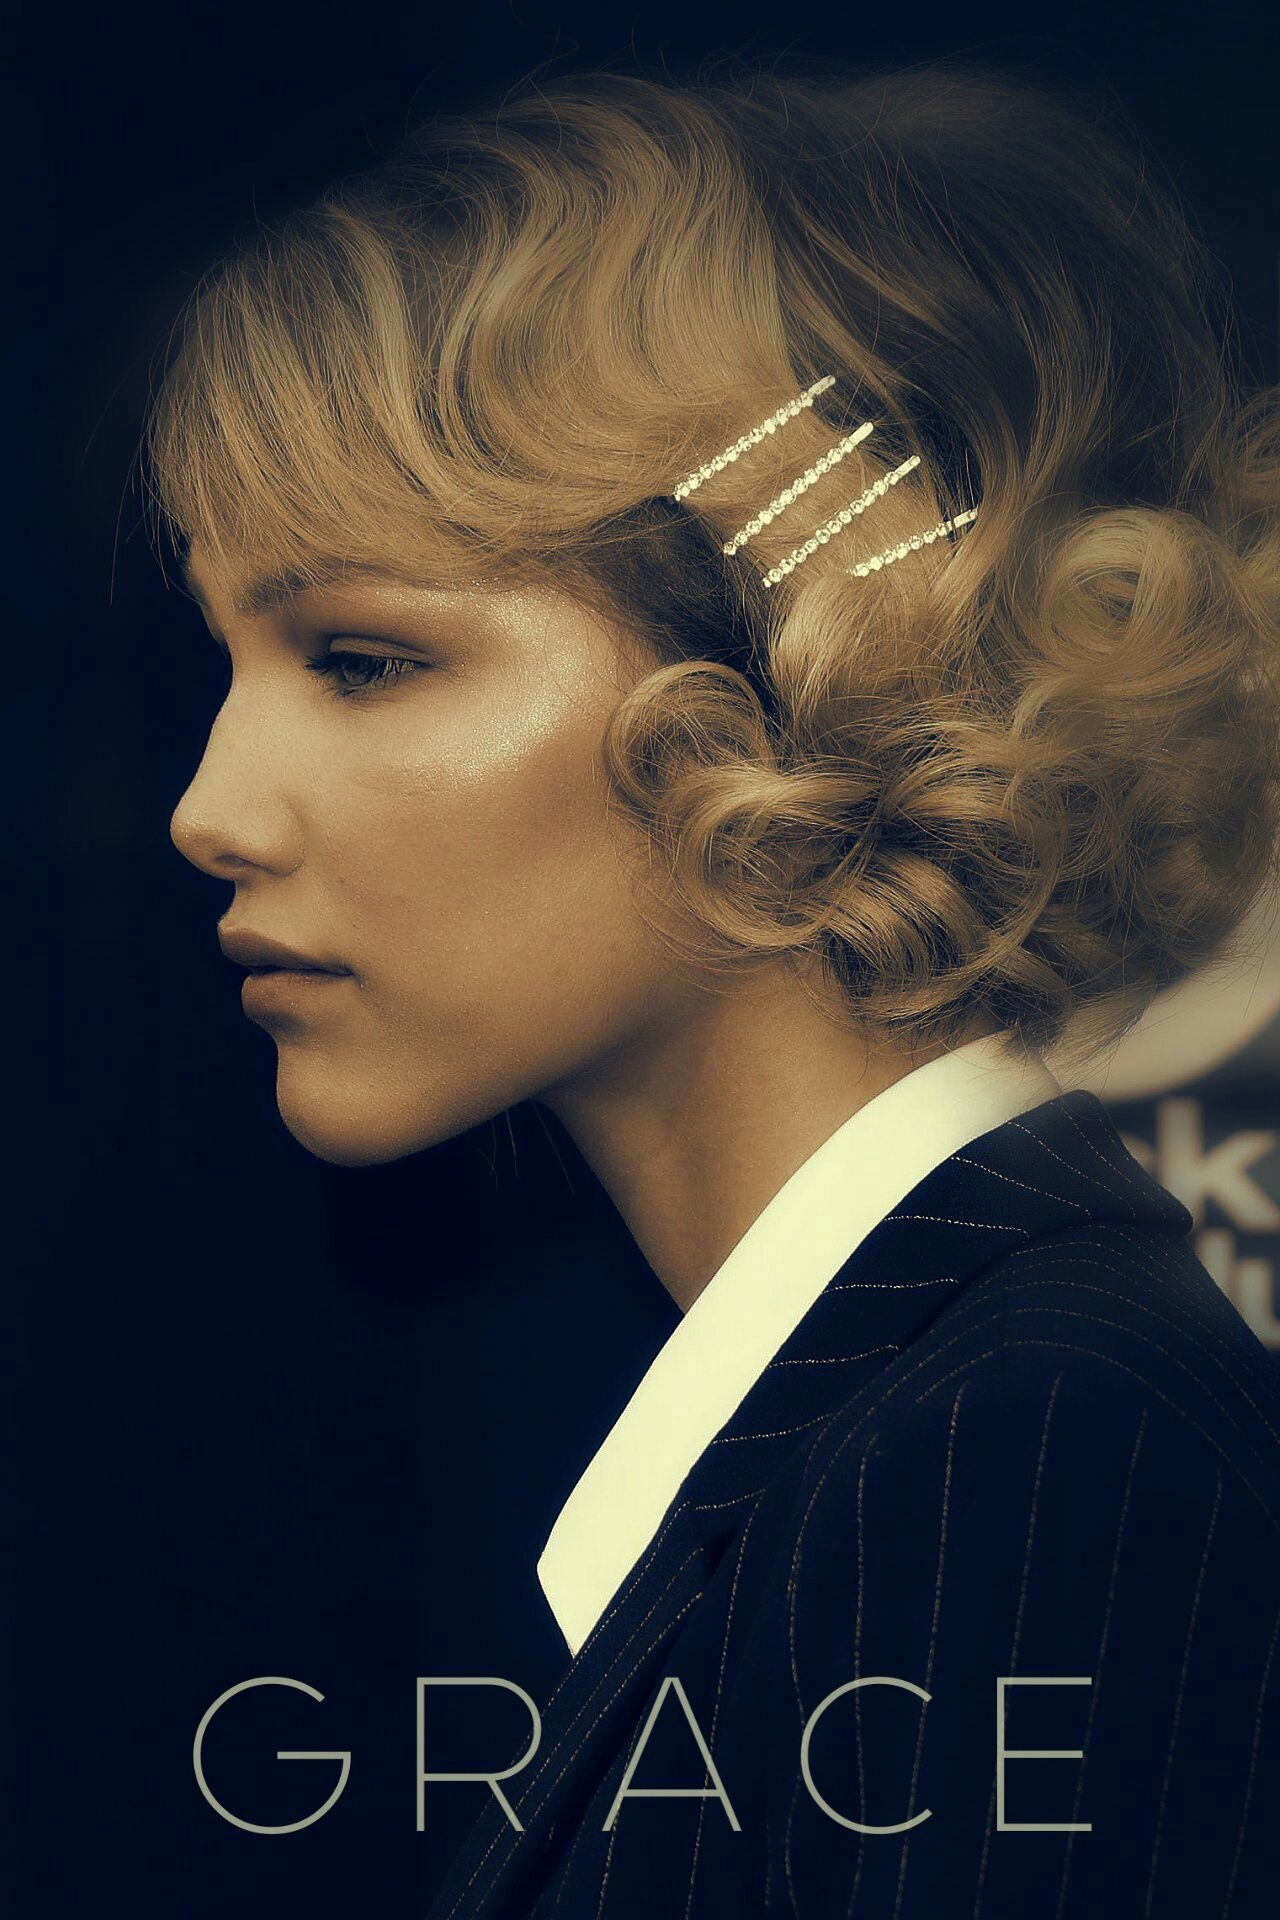 Grace VanderWaal: Germany, Billboard women in music, Forbes 30 Under 30: the youngest person ever included. 1280x1920 HD Background.